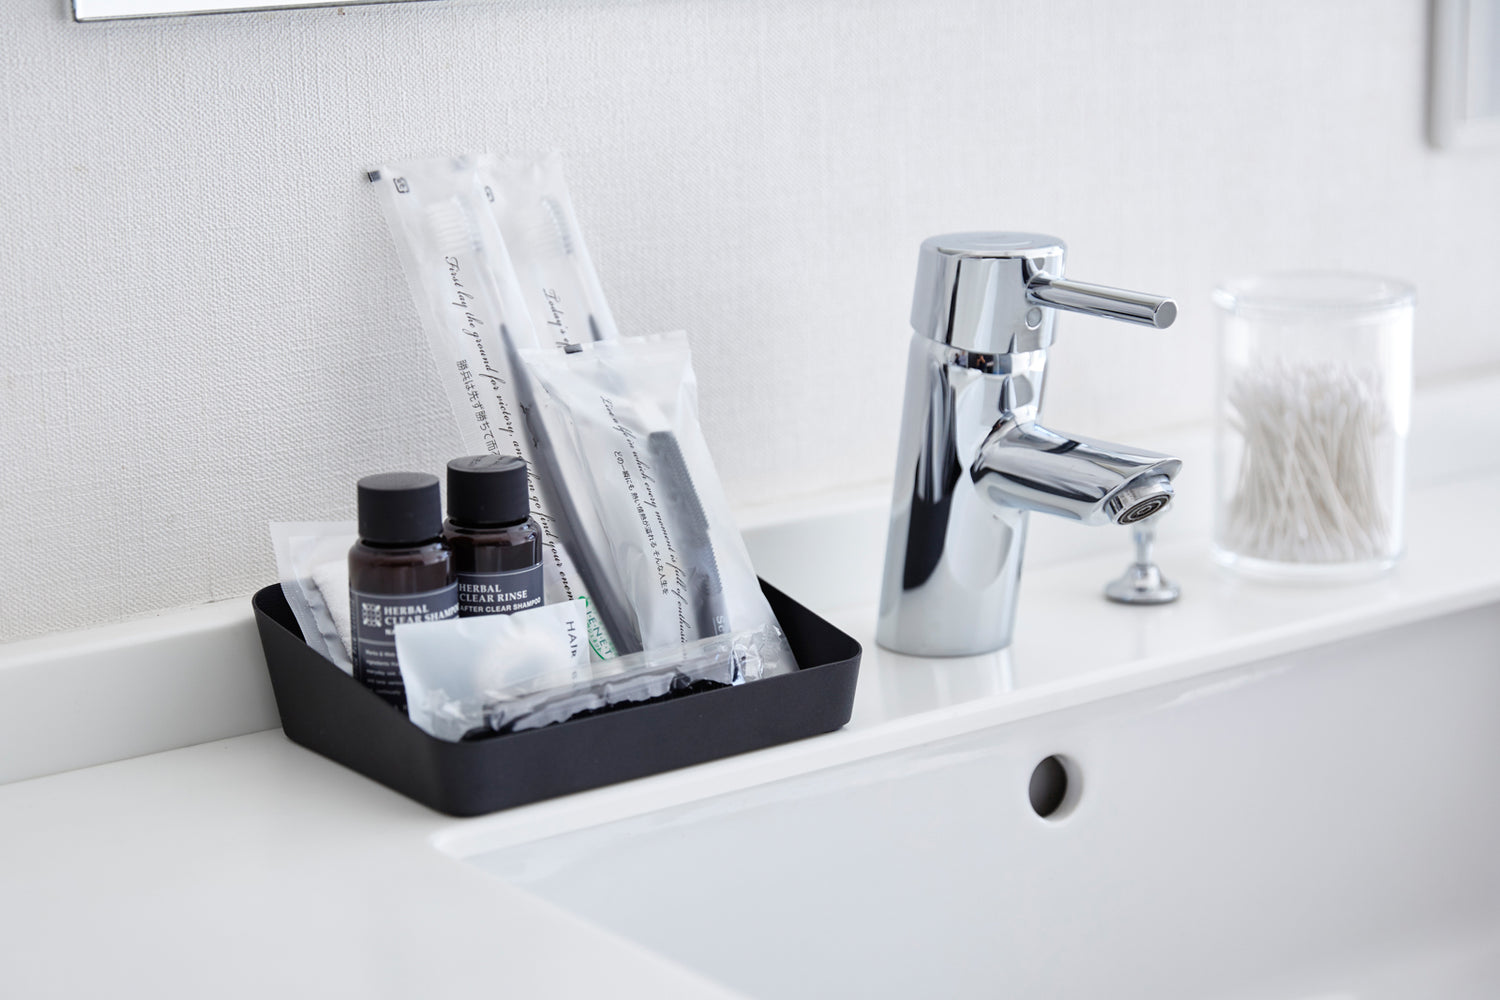 View 9 - Medium black Accessory Tray holding beauty products on bathroom sink counter by Yamazaki Home.